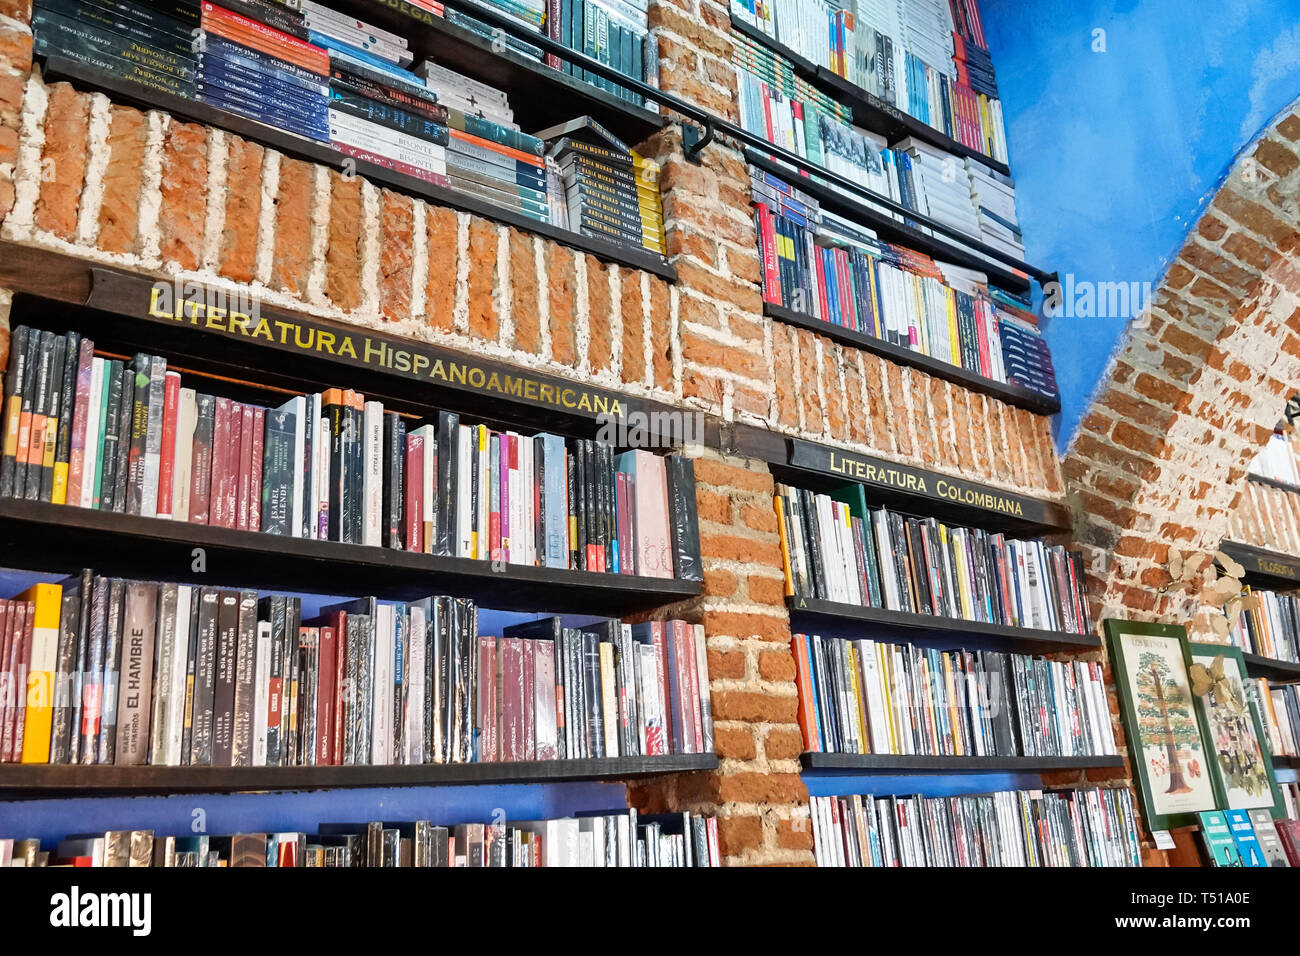 Cartagena Colombia,Abaco Libros y Cafe,Abacus bookstore cafe,interior inside,bookshelf,Latin American literature,books,sign,Spanish language,COL190123 Stock Photo